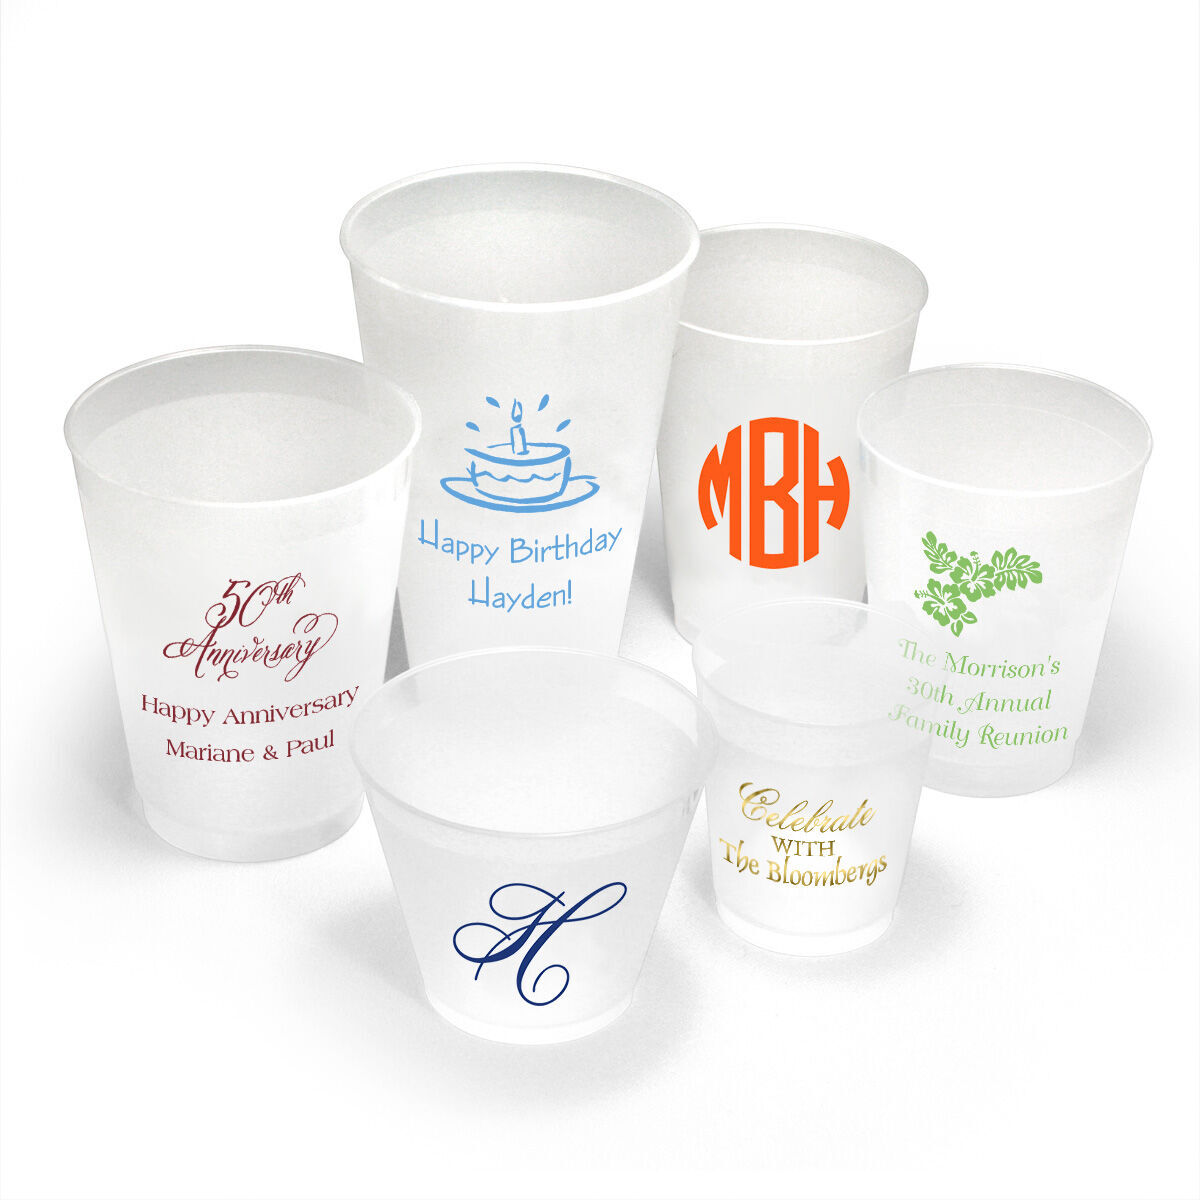 Couple's Shower Cups, Custom Frosted Plastic Cups, Engagement